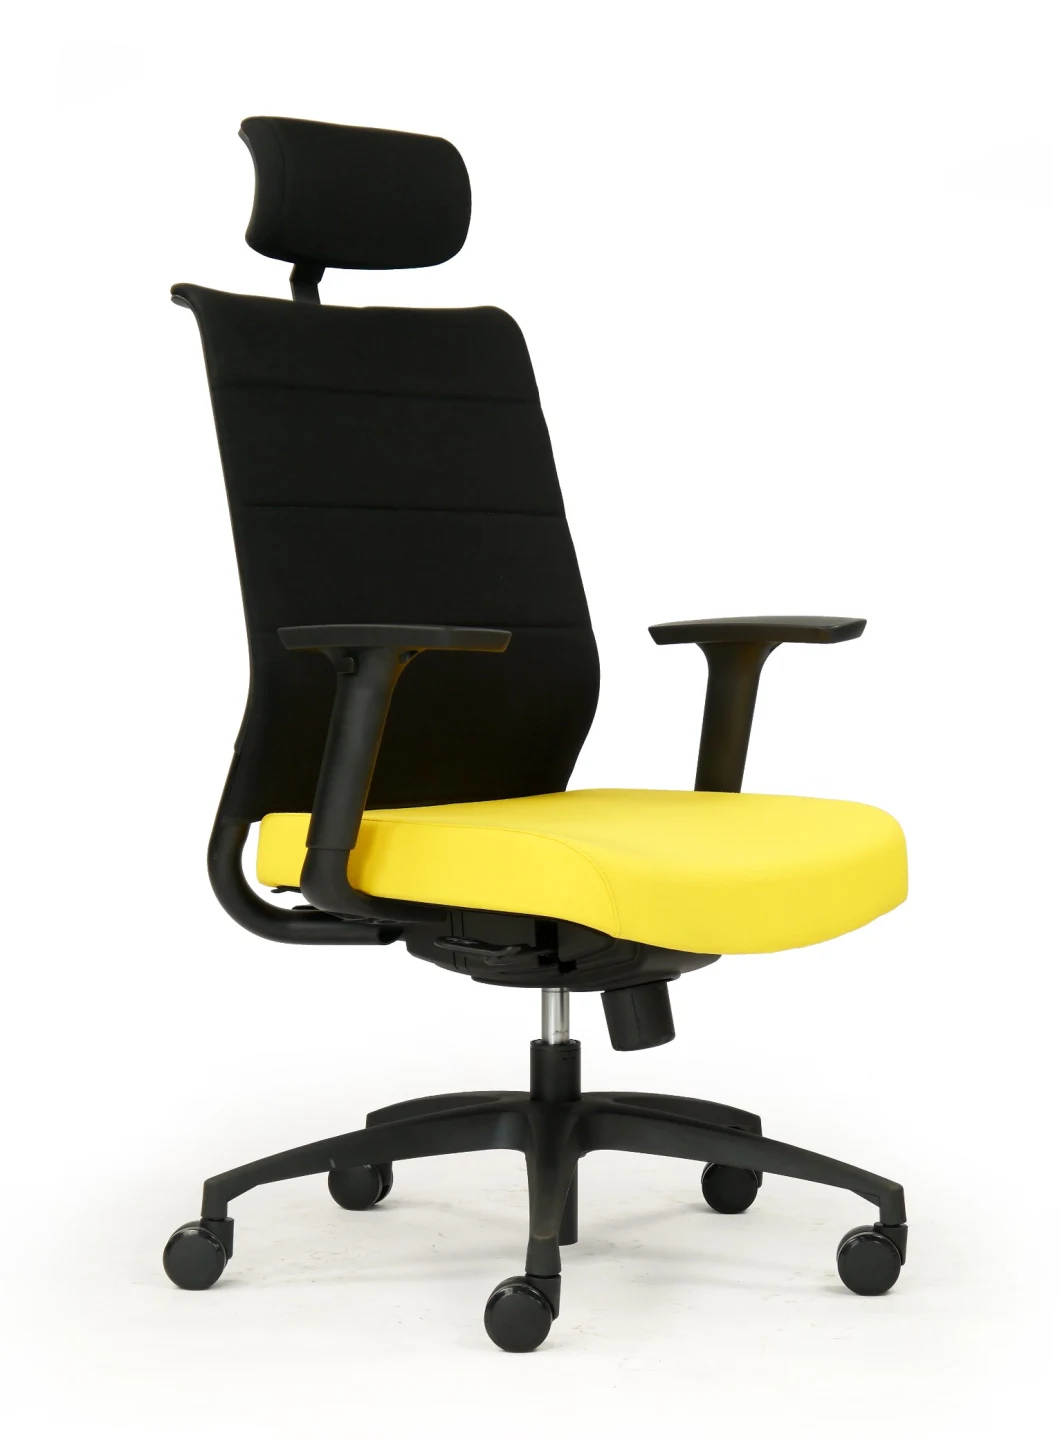 Zns Manufacturer Commercial Furniture Adjustable Mesh Chair Ergonomic High Back Office Chair